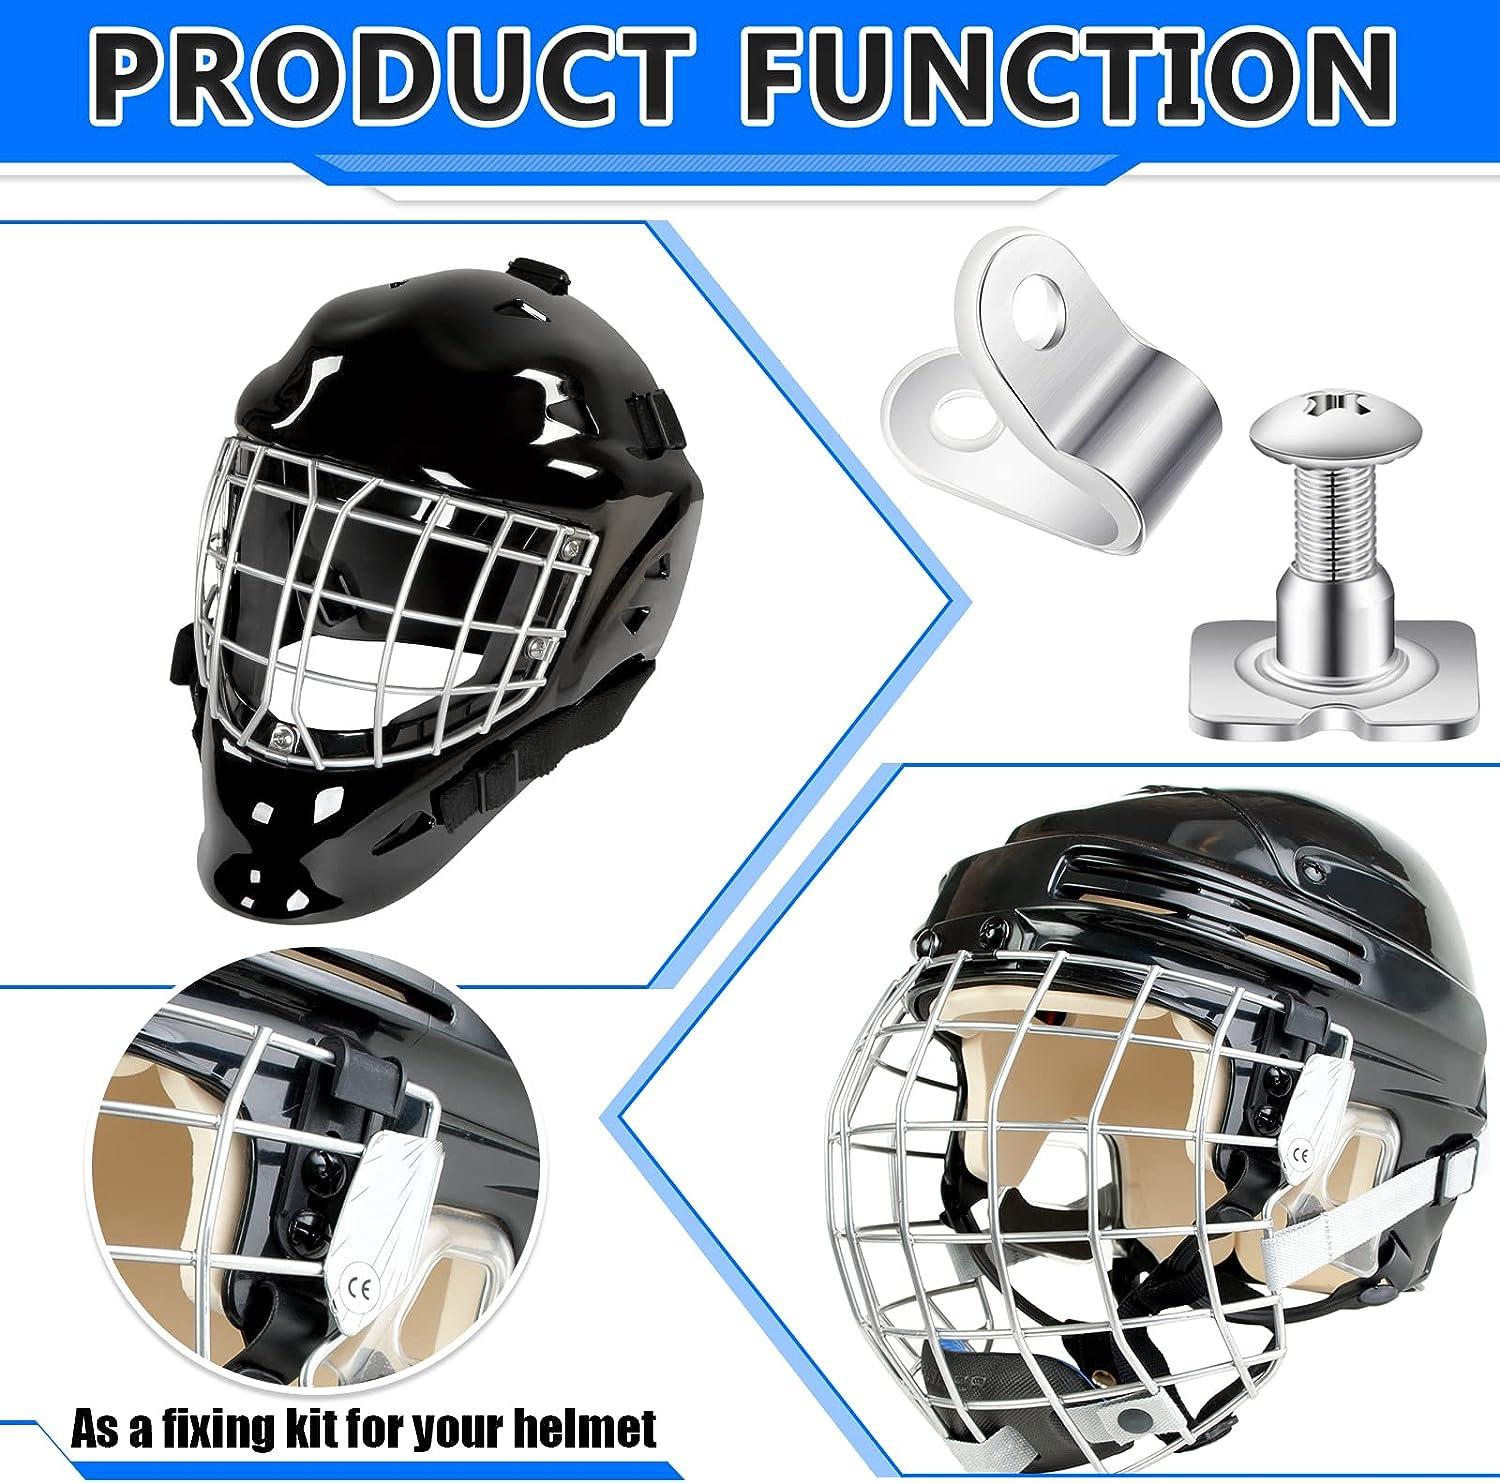  5 Pairs Hockey Helmet Cage J-Clips Replacement Hockey Helmet  Repair Kit Facemask Hardware Kit to Hold Hockey Helmet Shield in Place and  Secure a Tight Fit : Sports & Outdoors